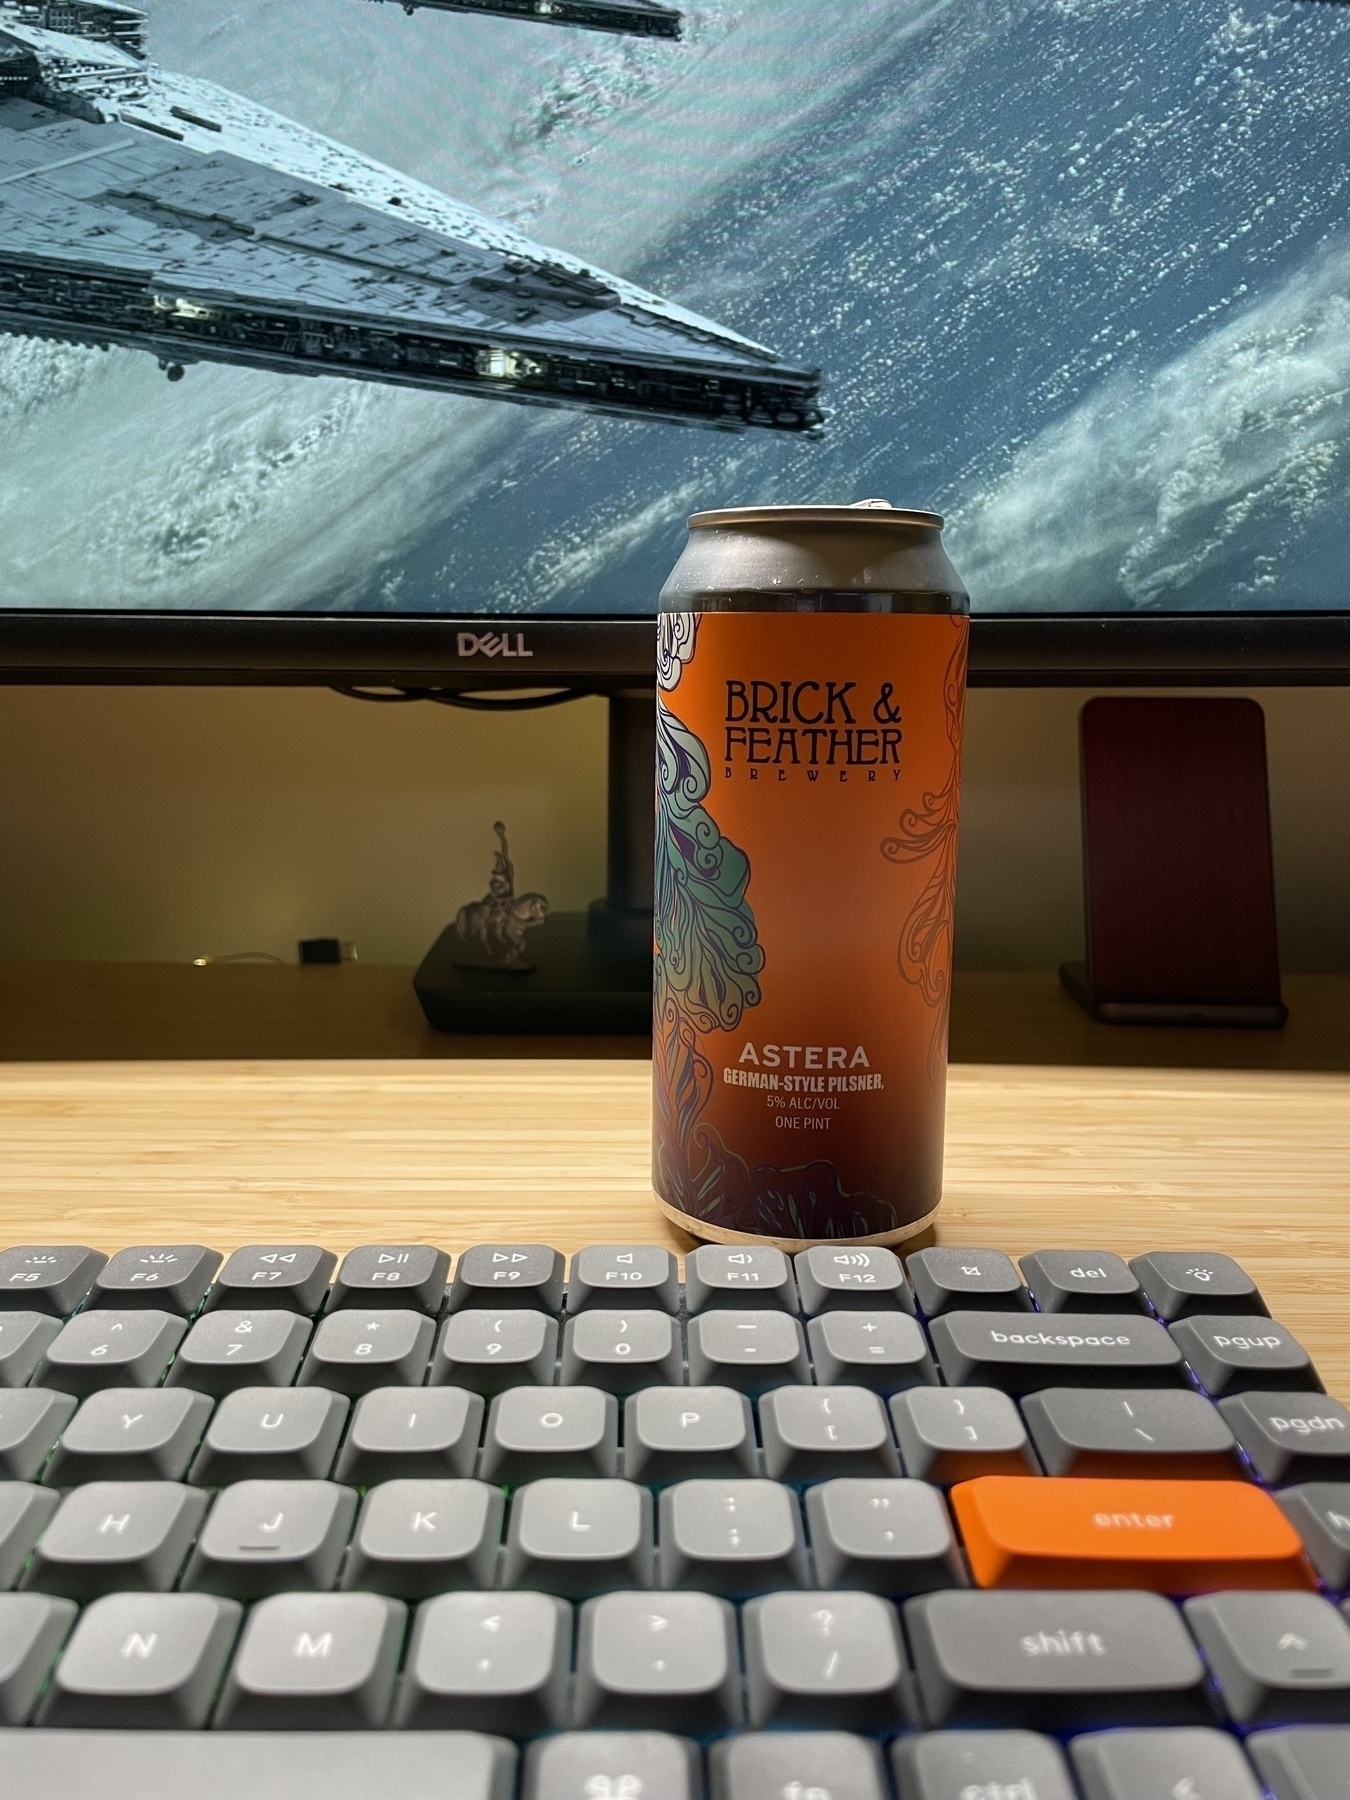 Can of beer between keyboard and monitor